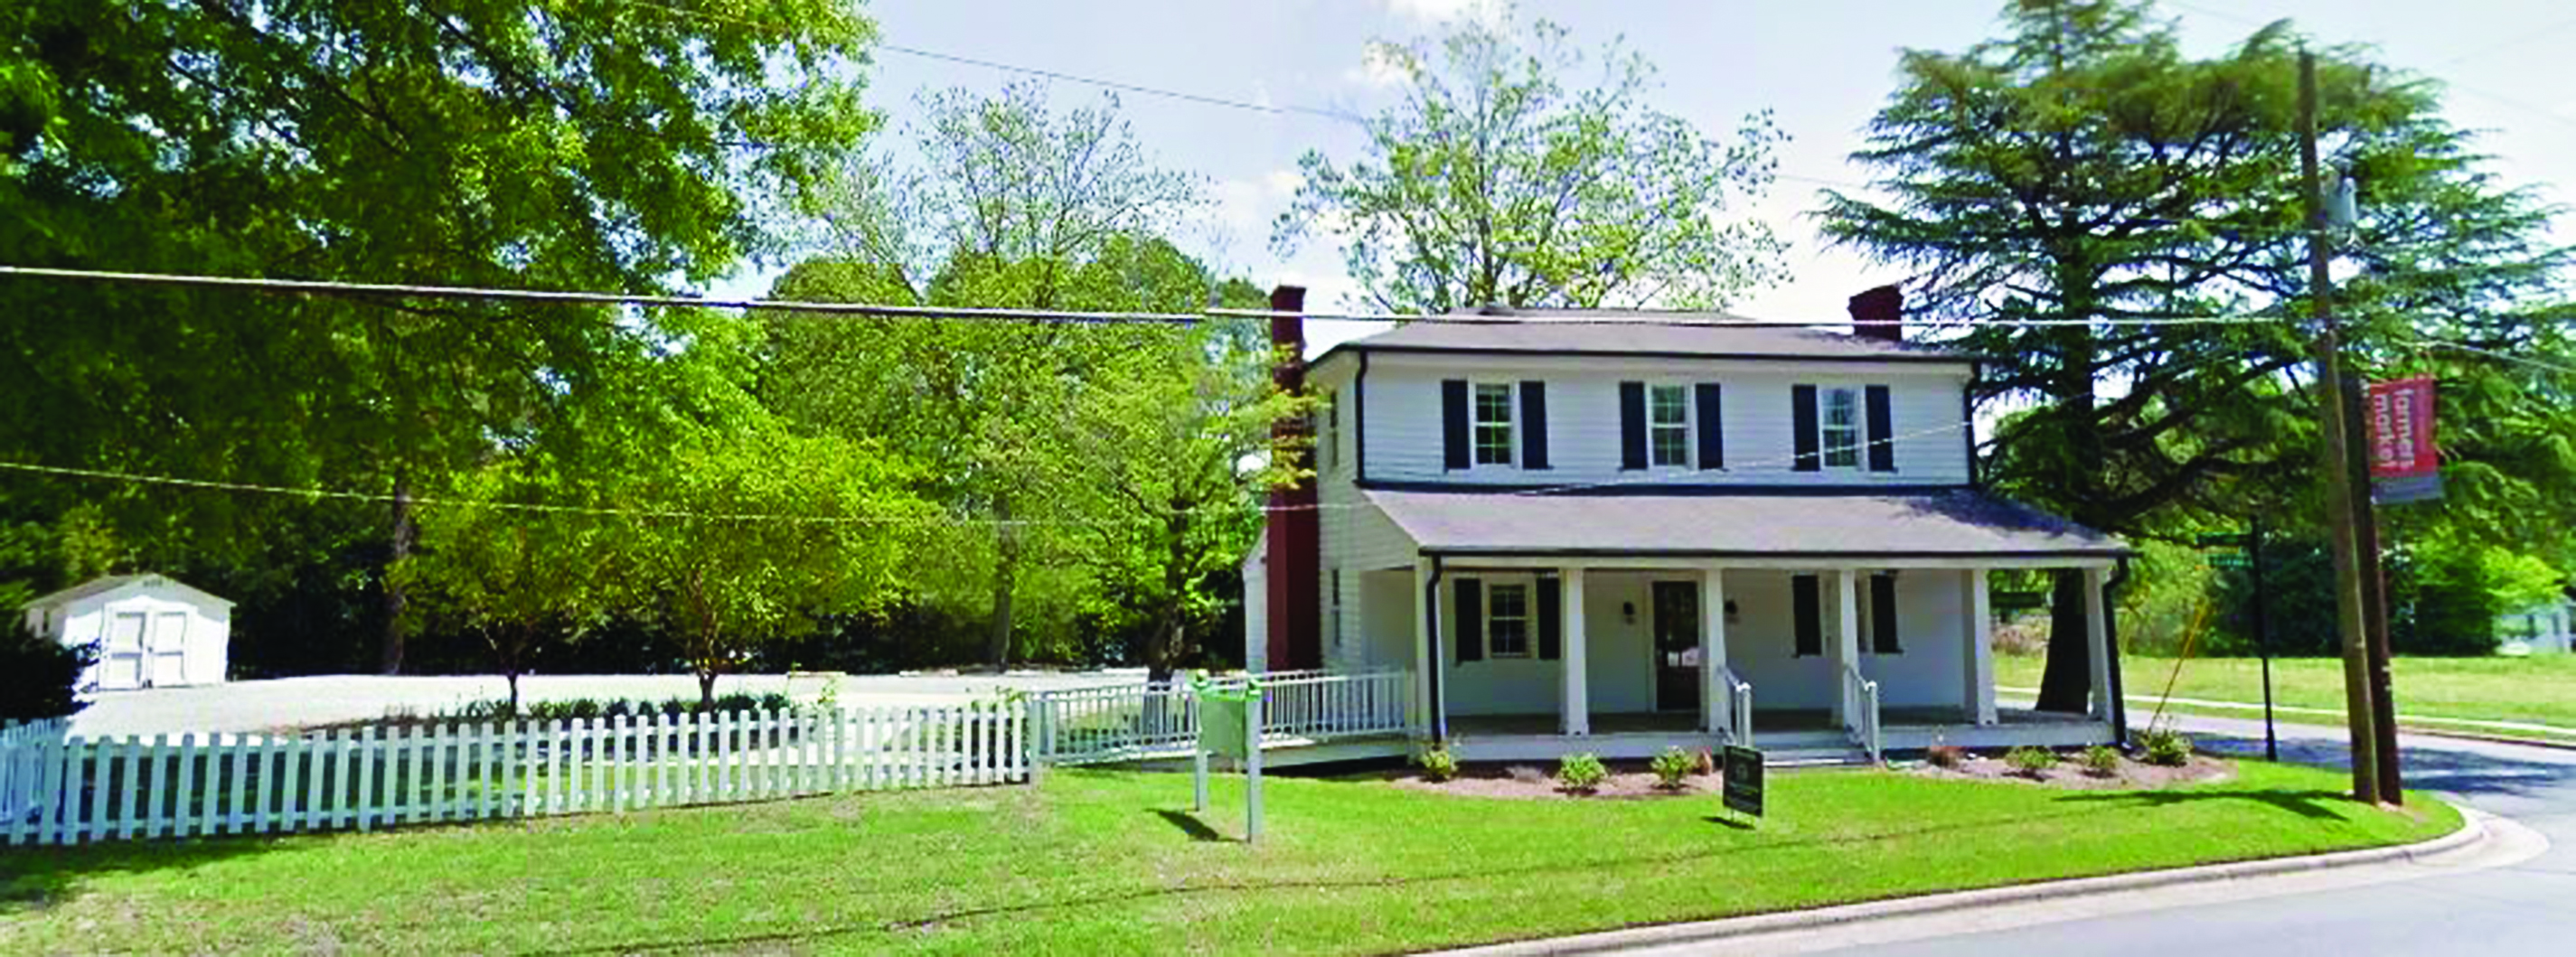 These Old Houses      By Barbara Koblich, Town of Holly Springs Historian